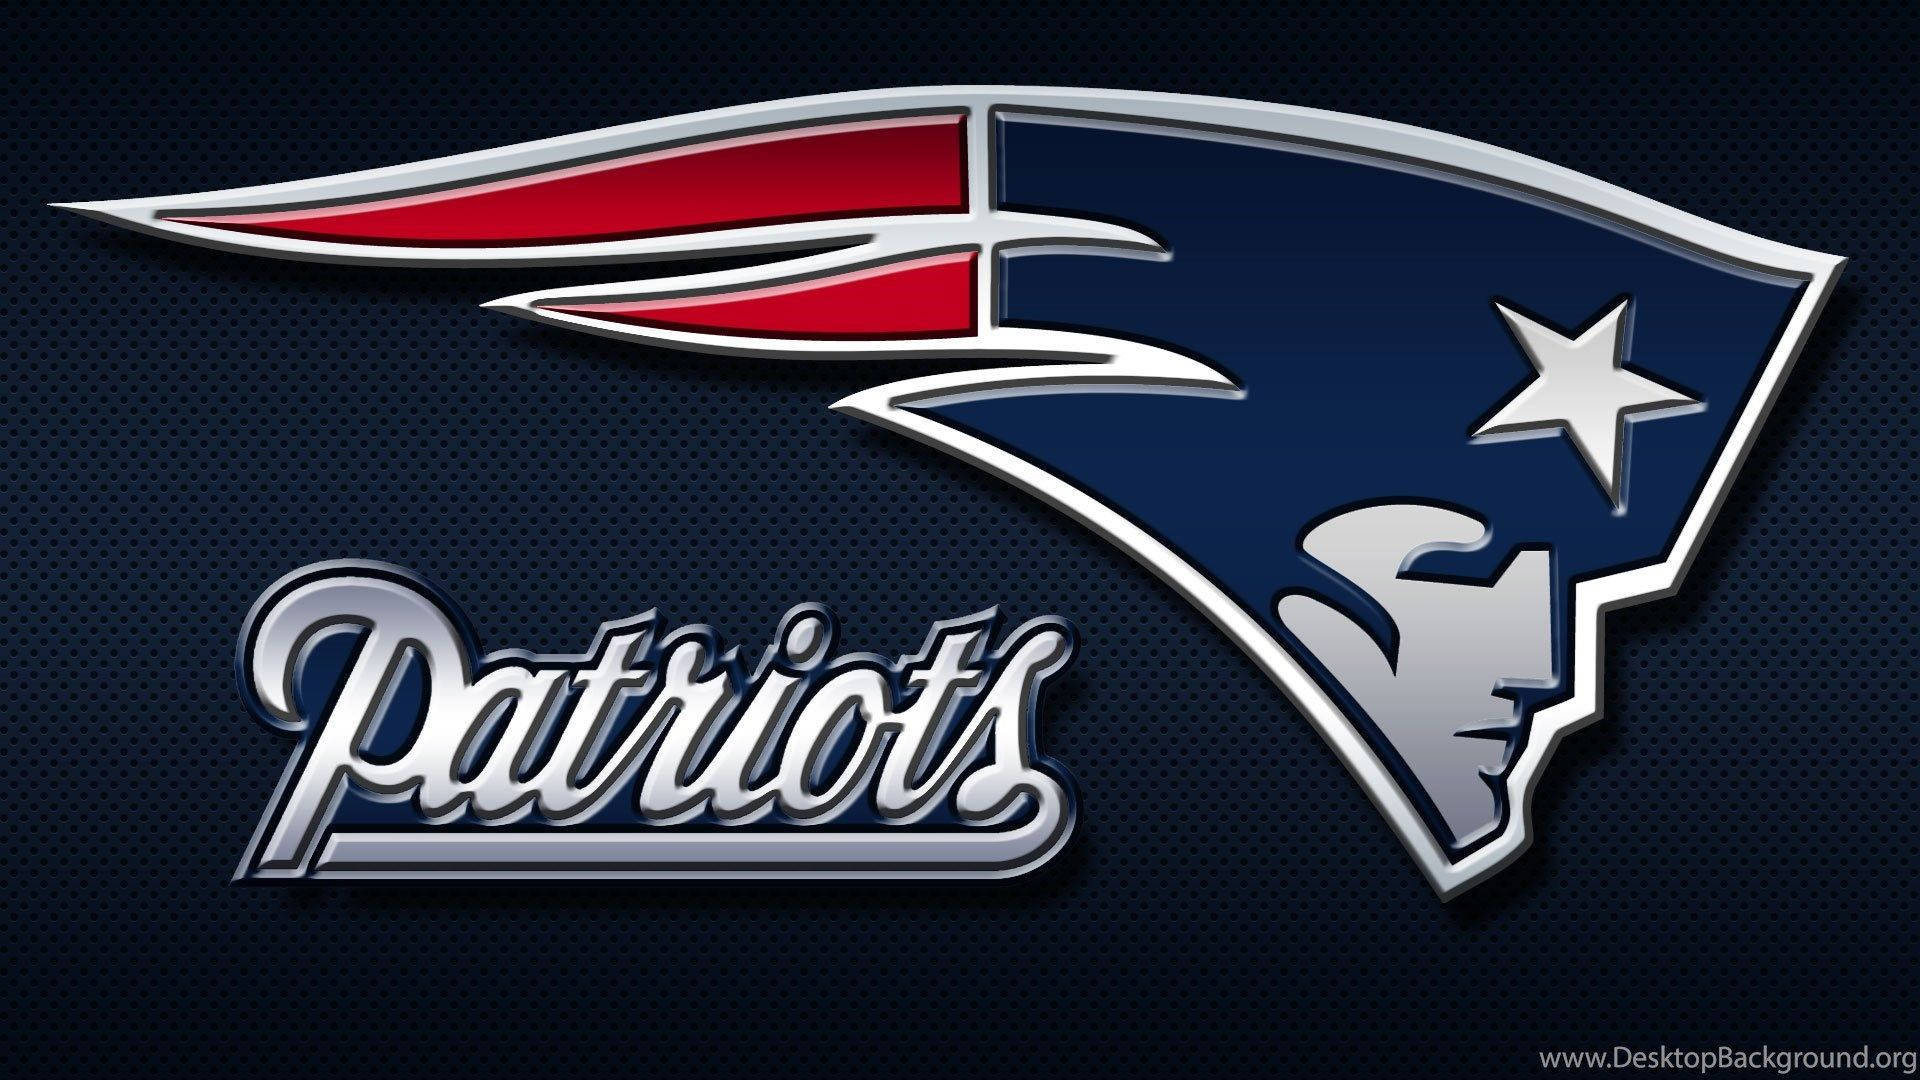 Tom Brady and Bill Belichick Lead the New England Patriots to Victory Wallpaper